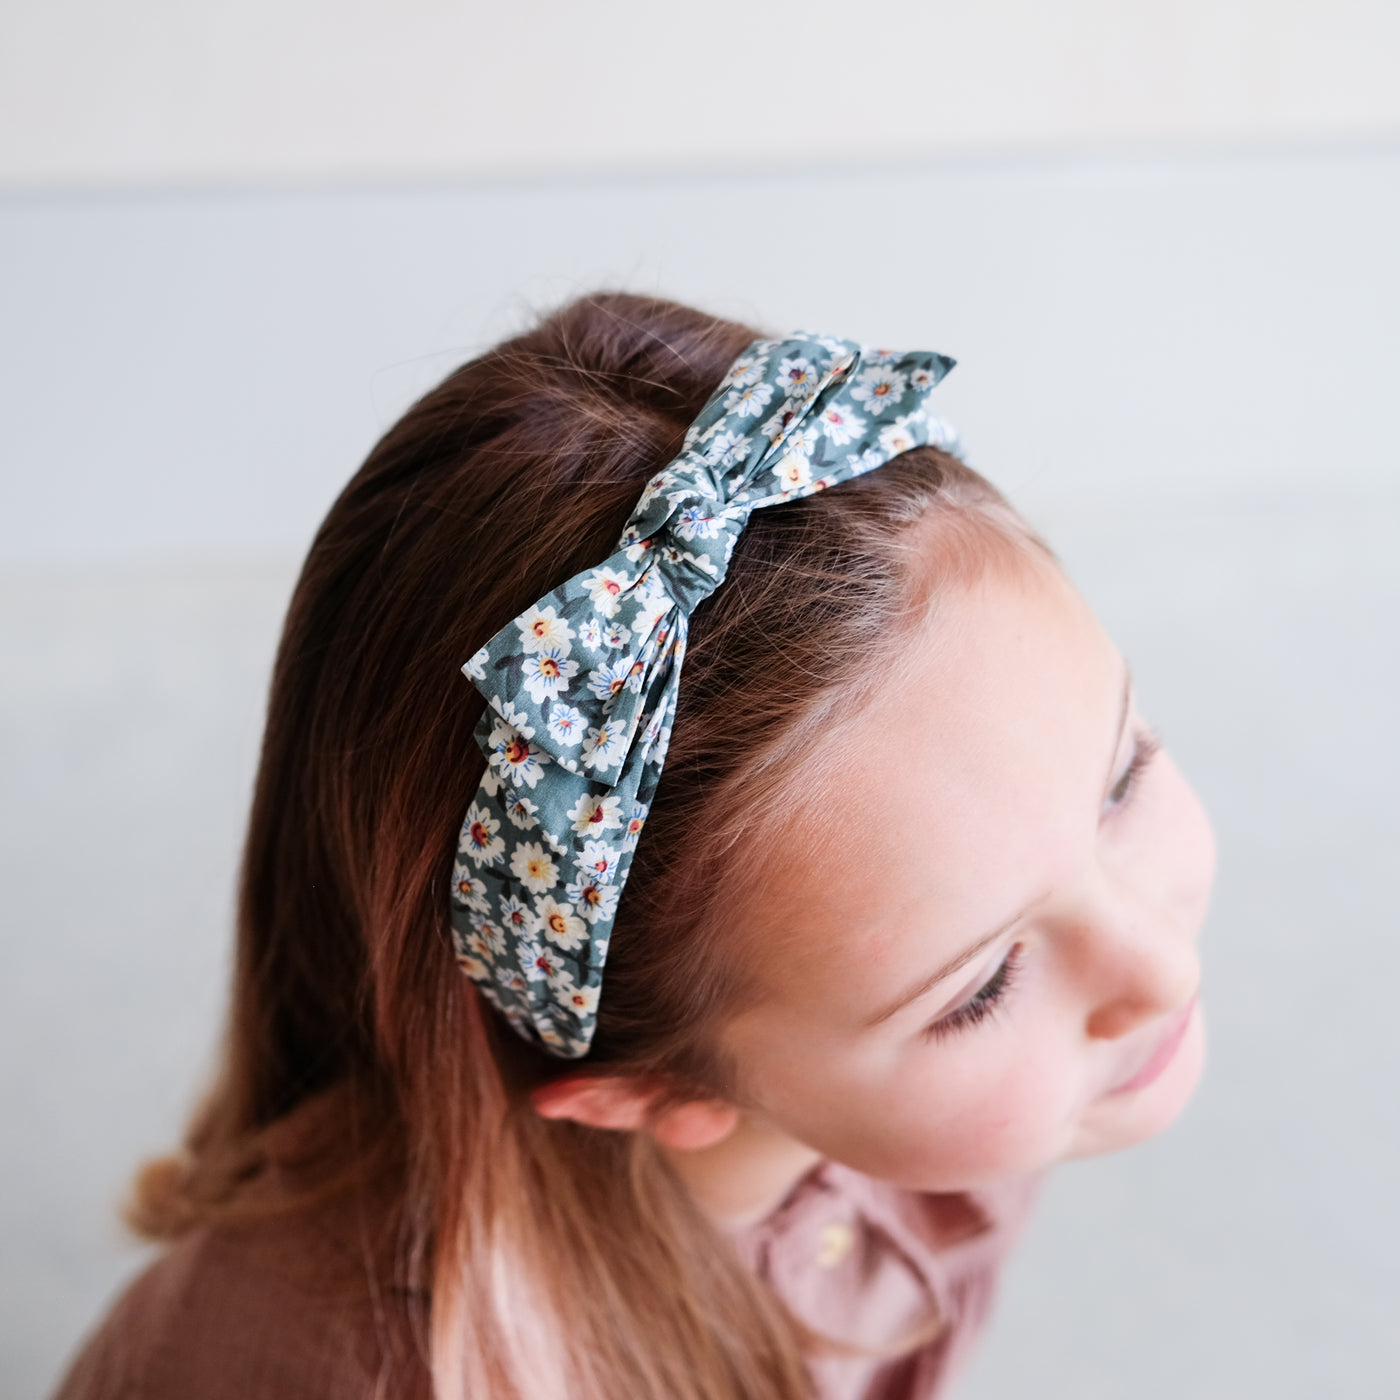 Photo of daisy print headband with bow taken from above, worn by little girl